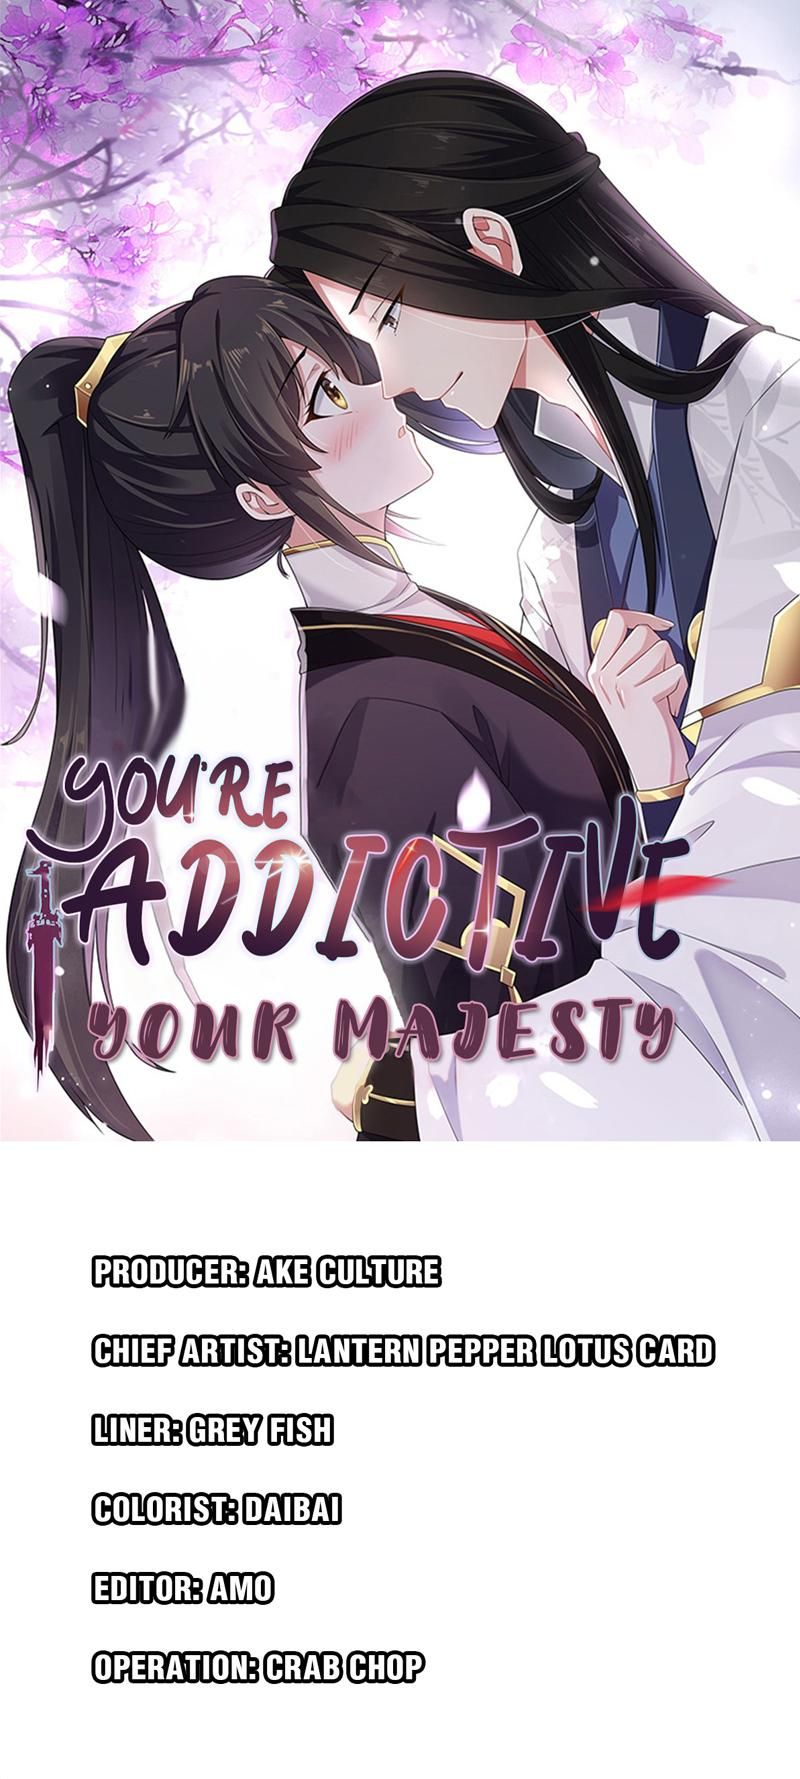 You’re Addictive! chapter 7